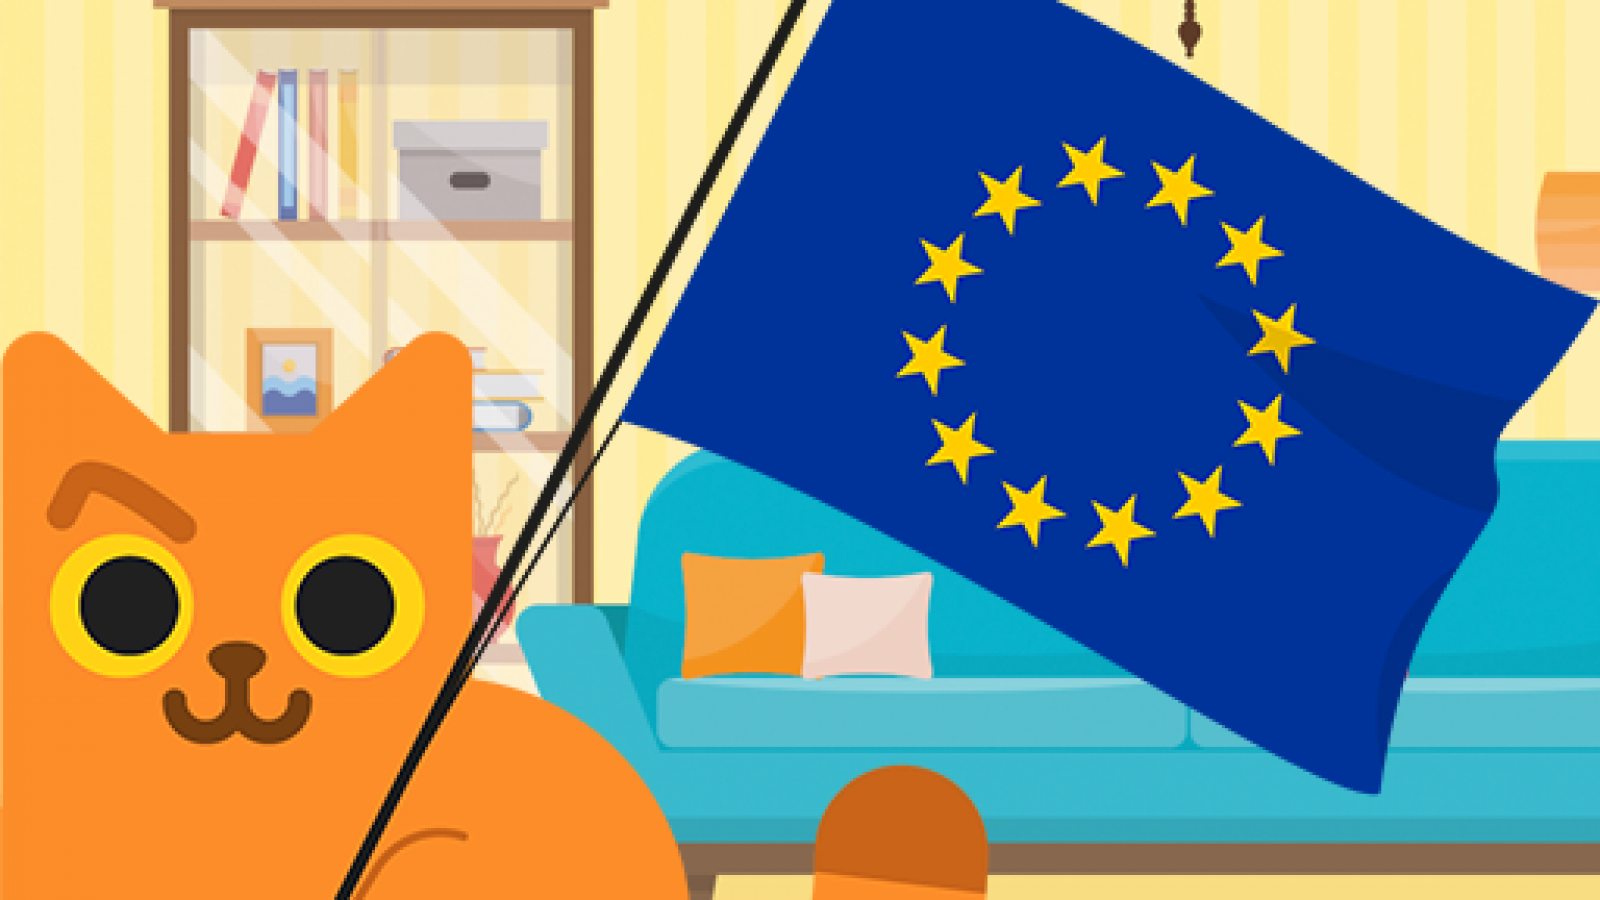 Test your energy efficiency skills with the new game by EU4Energy!